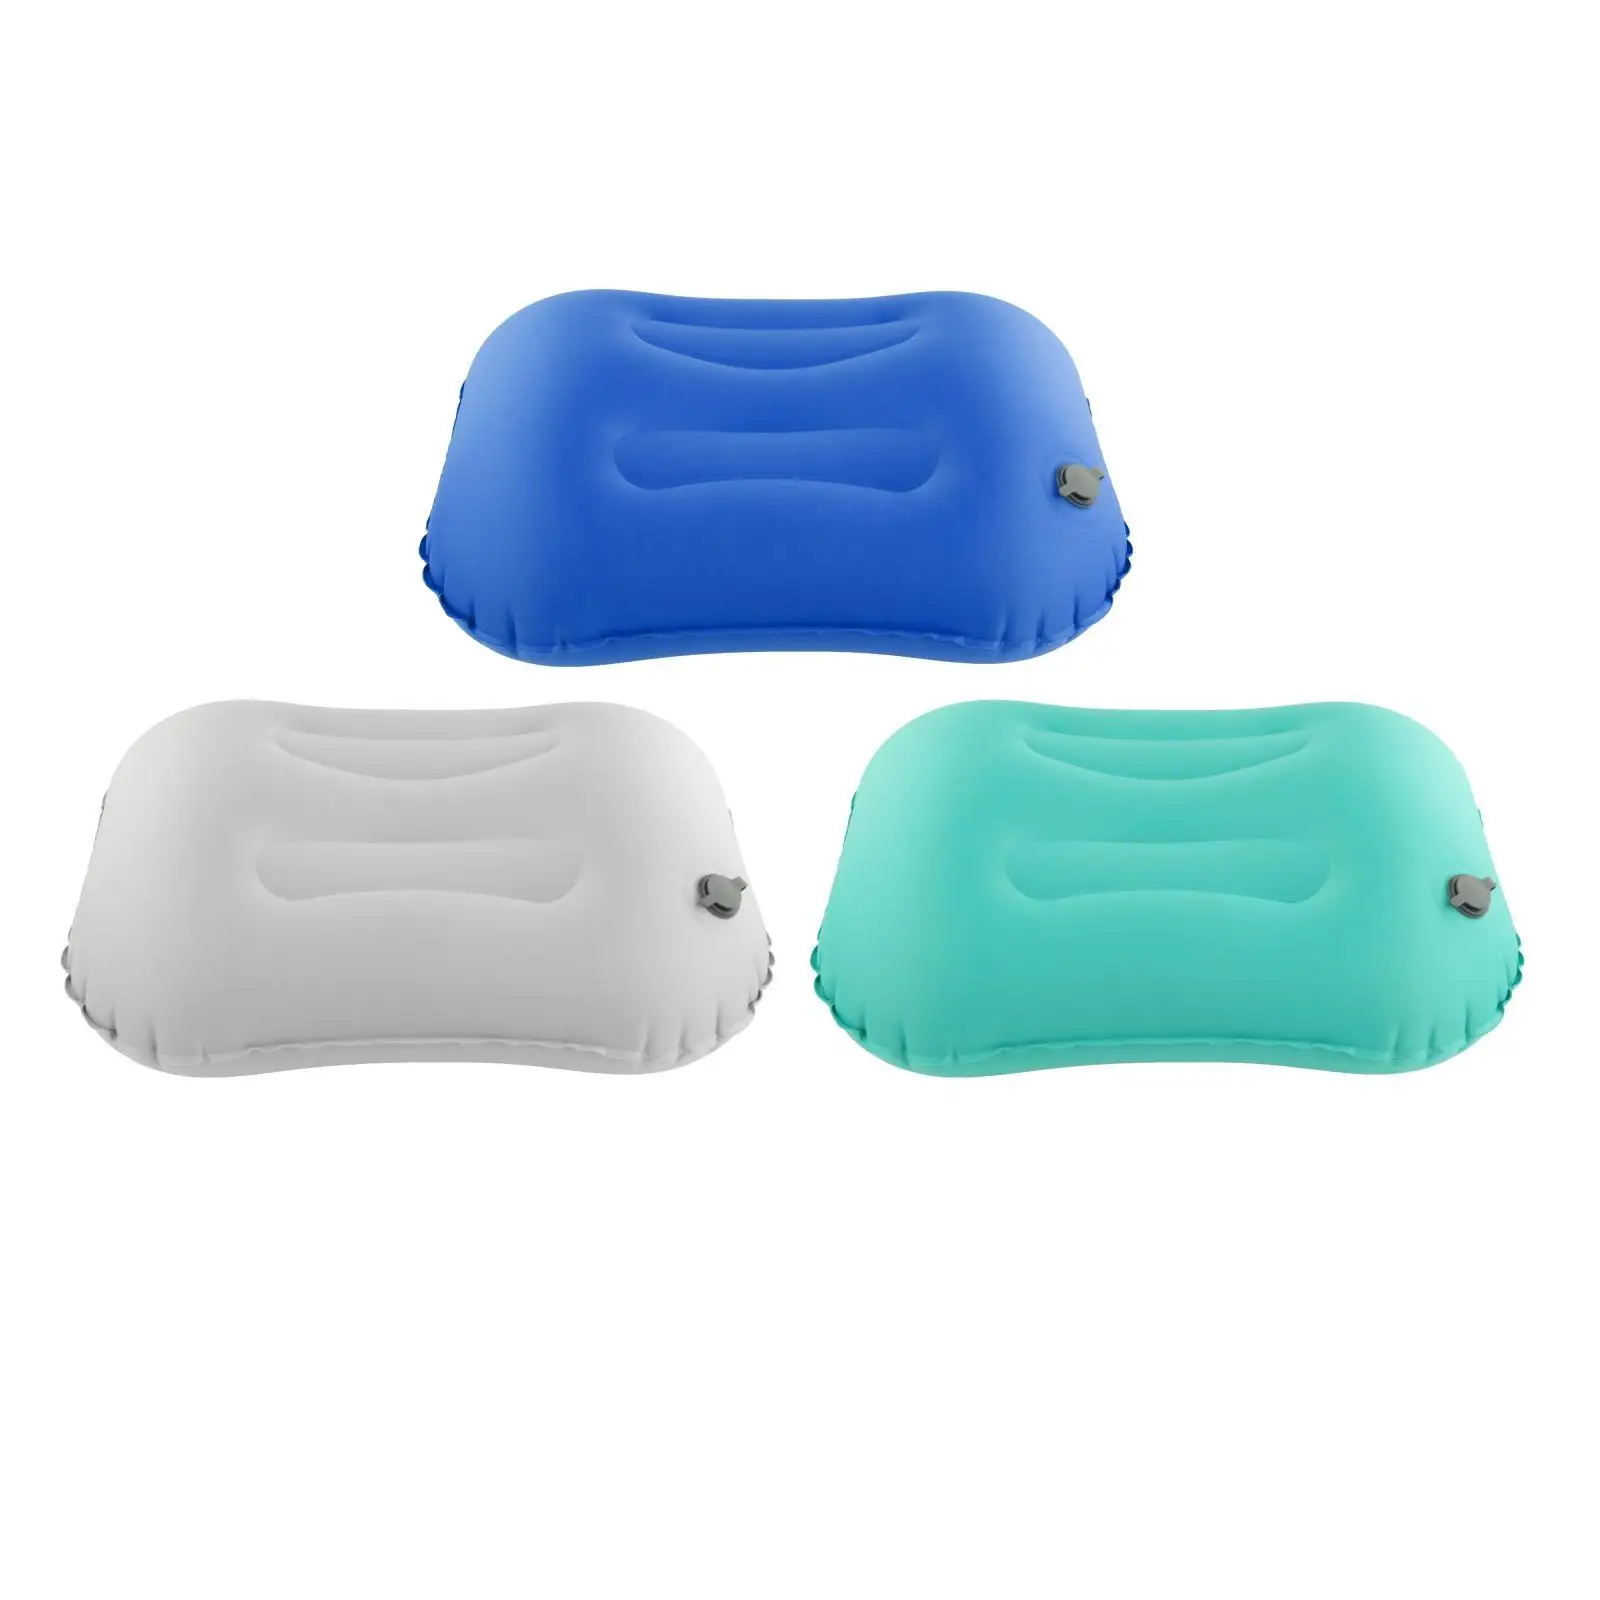 Inflatable Camping Pillow Comfortable Ergonomic Pillows Neck pillow insserts for Travel Backpacking Fishing